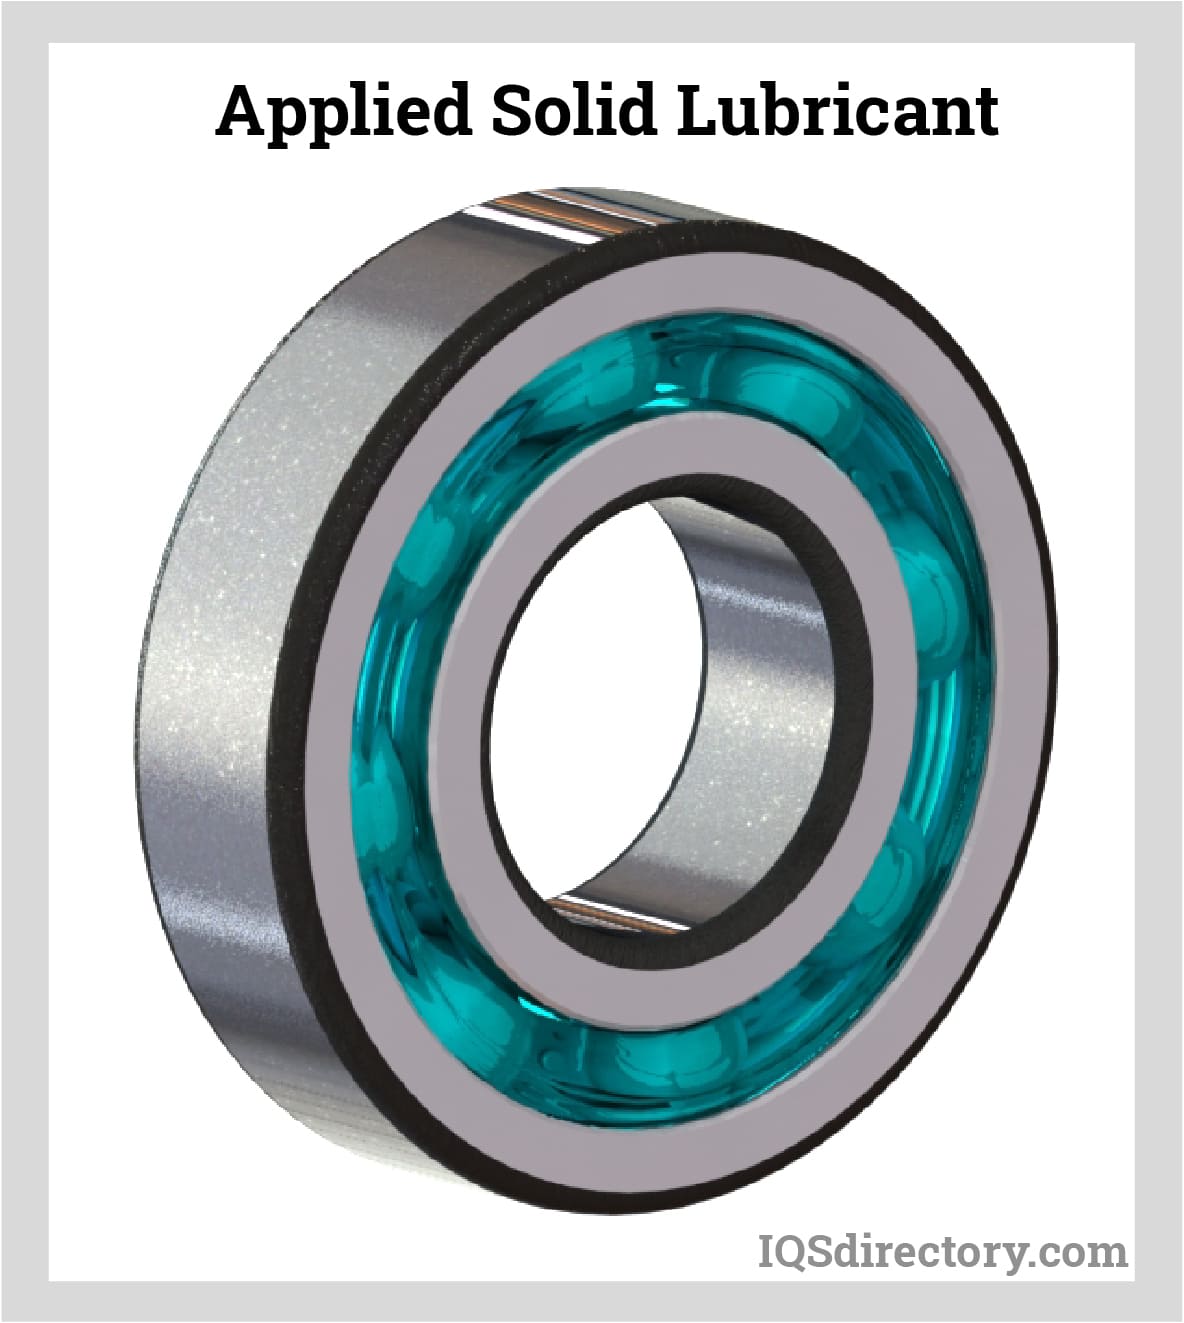 Applied Solid Lubricant